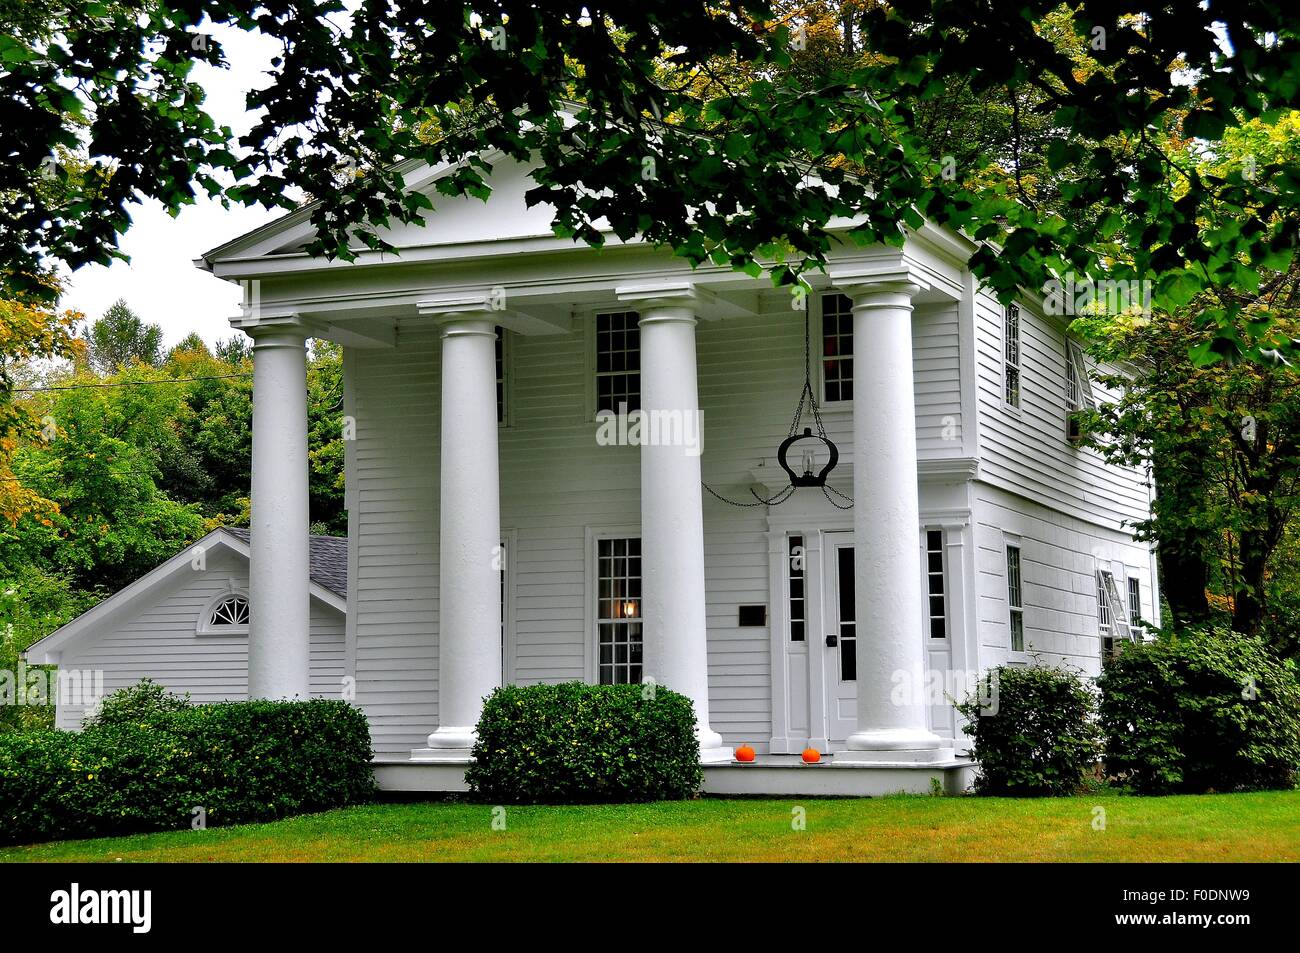 Granville, Massachustts:  A handsome early 19th century Greek Revival house in the village's historic district * Stock Photo